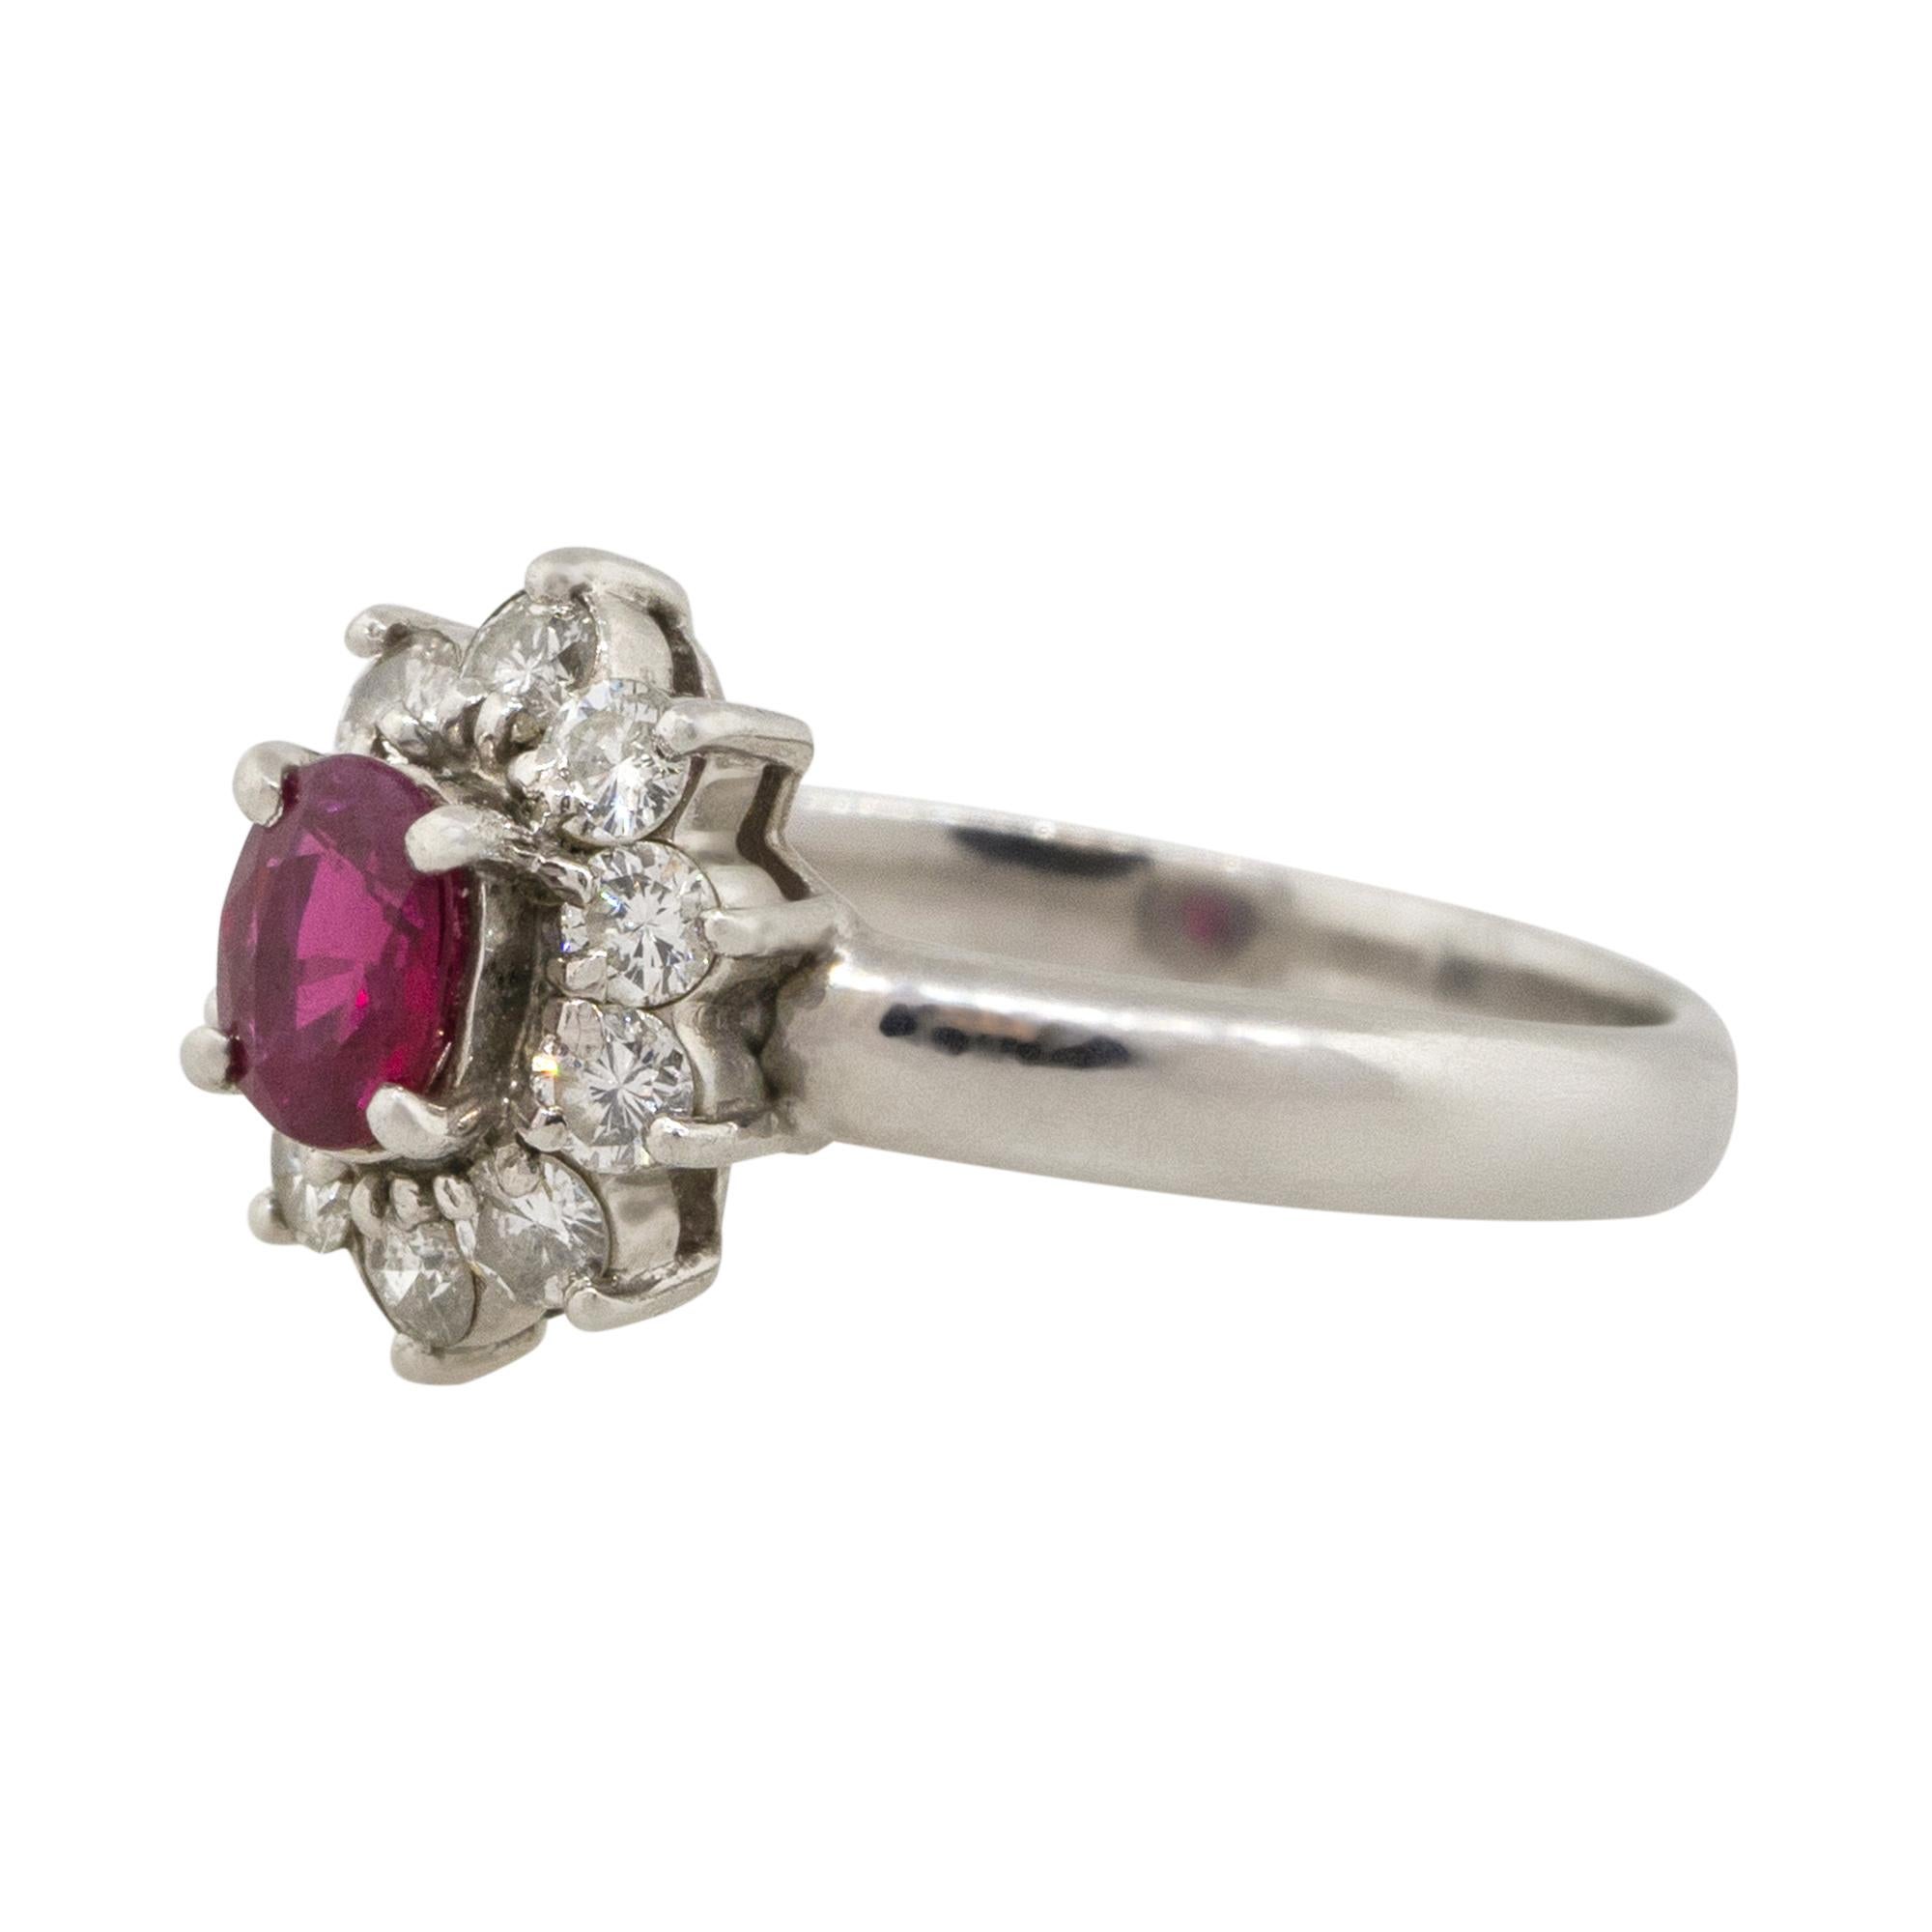 Material: Platinum
Gemstone details: Approx. 0.38ctw oval cut Ruby center
Diamond details: Approx. 0.36ctw of round and baguette cut Diamonds. Diamonds are G/H in color and VS in clarity
Ring Size: 5
Ring Measurements: 0.70